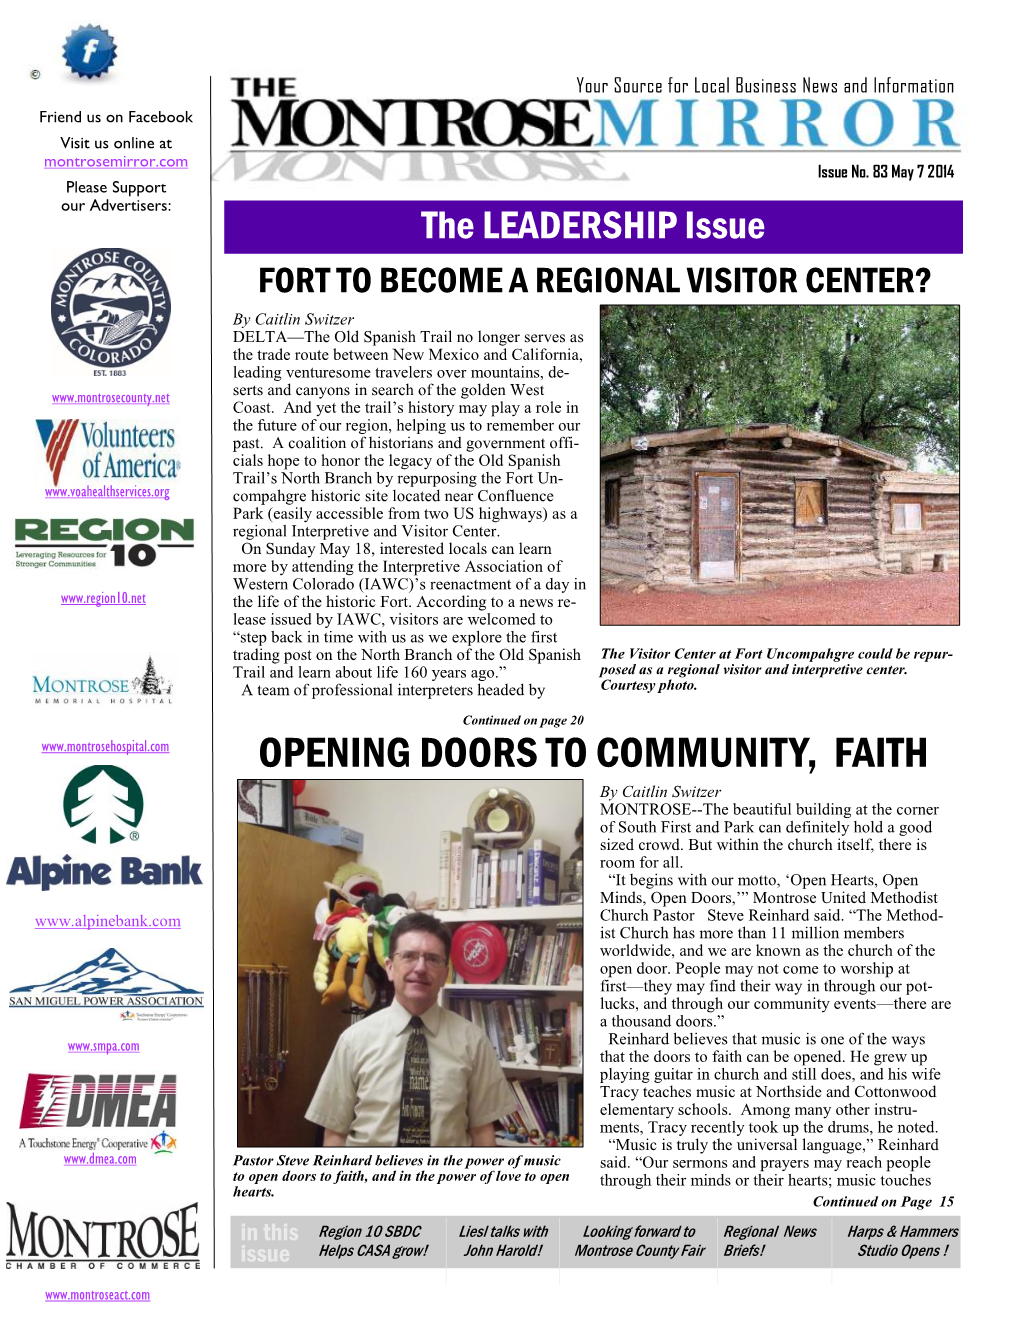 OPENING DOORS to COMMUNITY, FAITH by Caitlin Switzer MONTROSE--The Beautiful Building at the Corner of South First and Park Can Definitely Hold a Good Sized Crowd